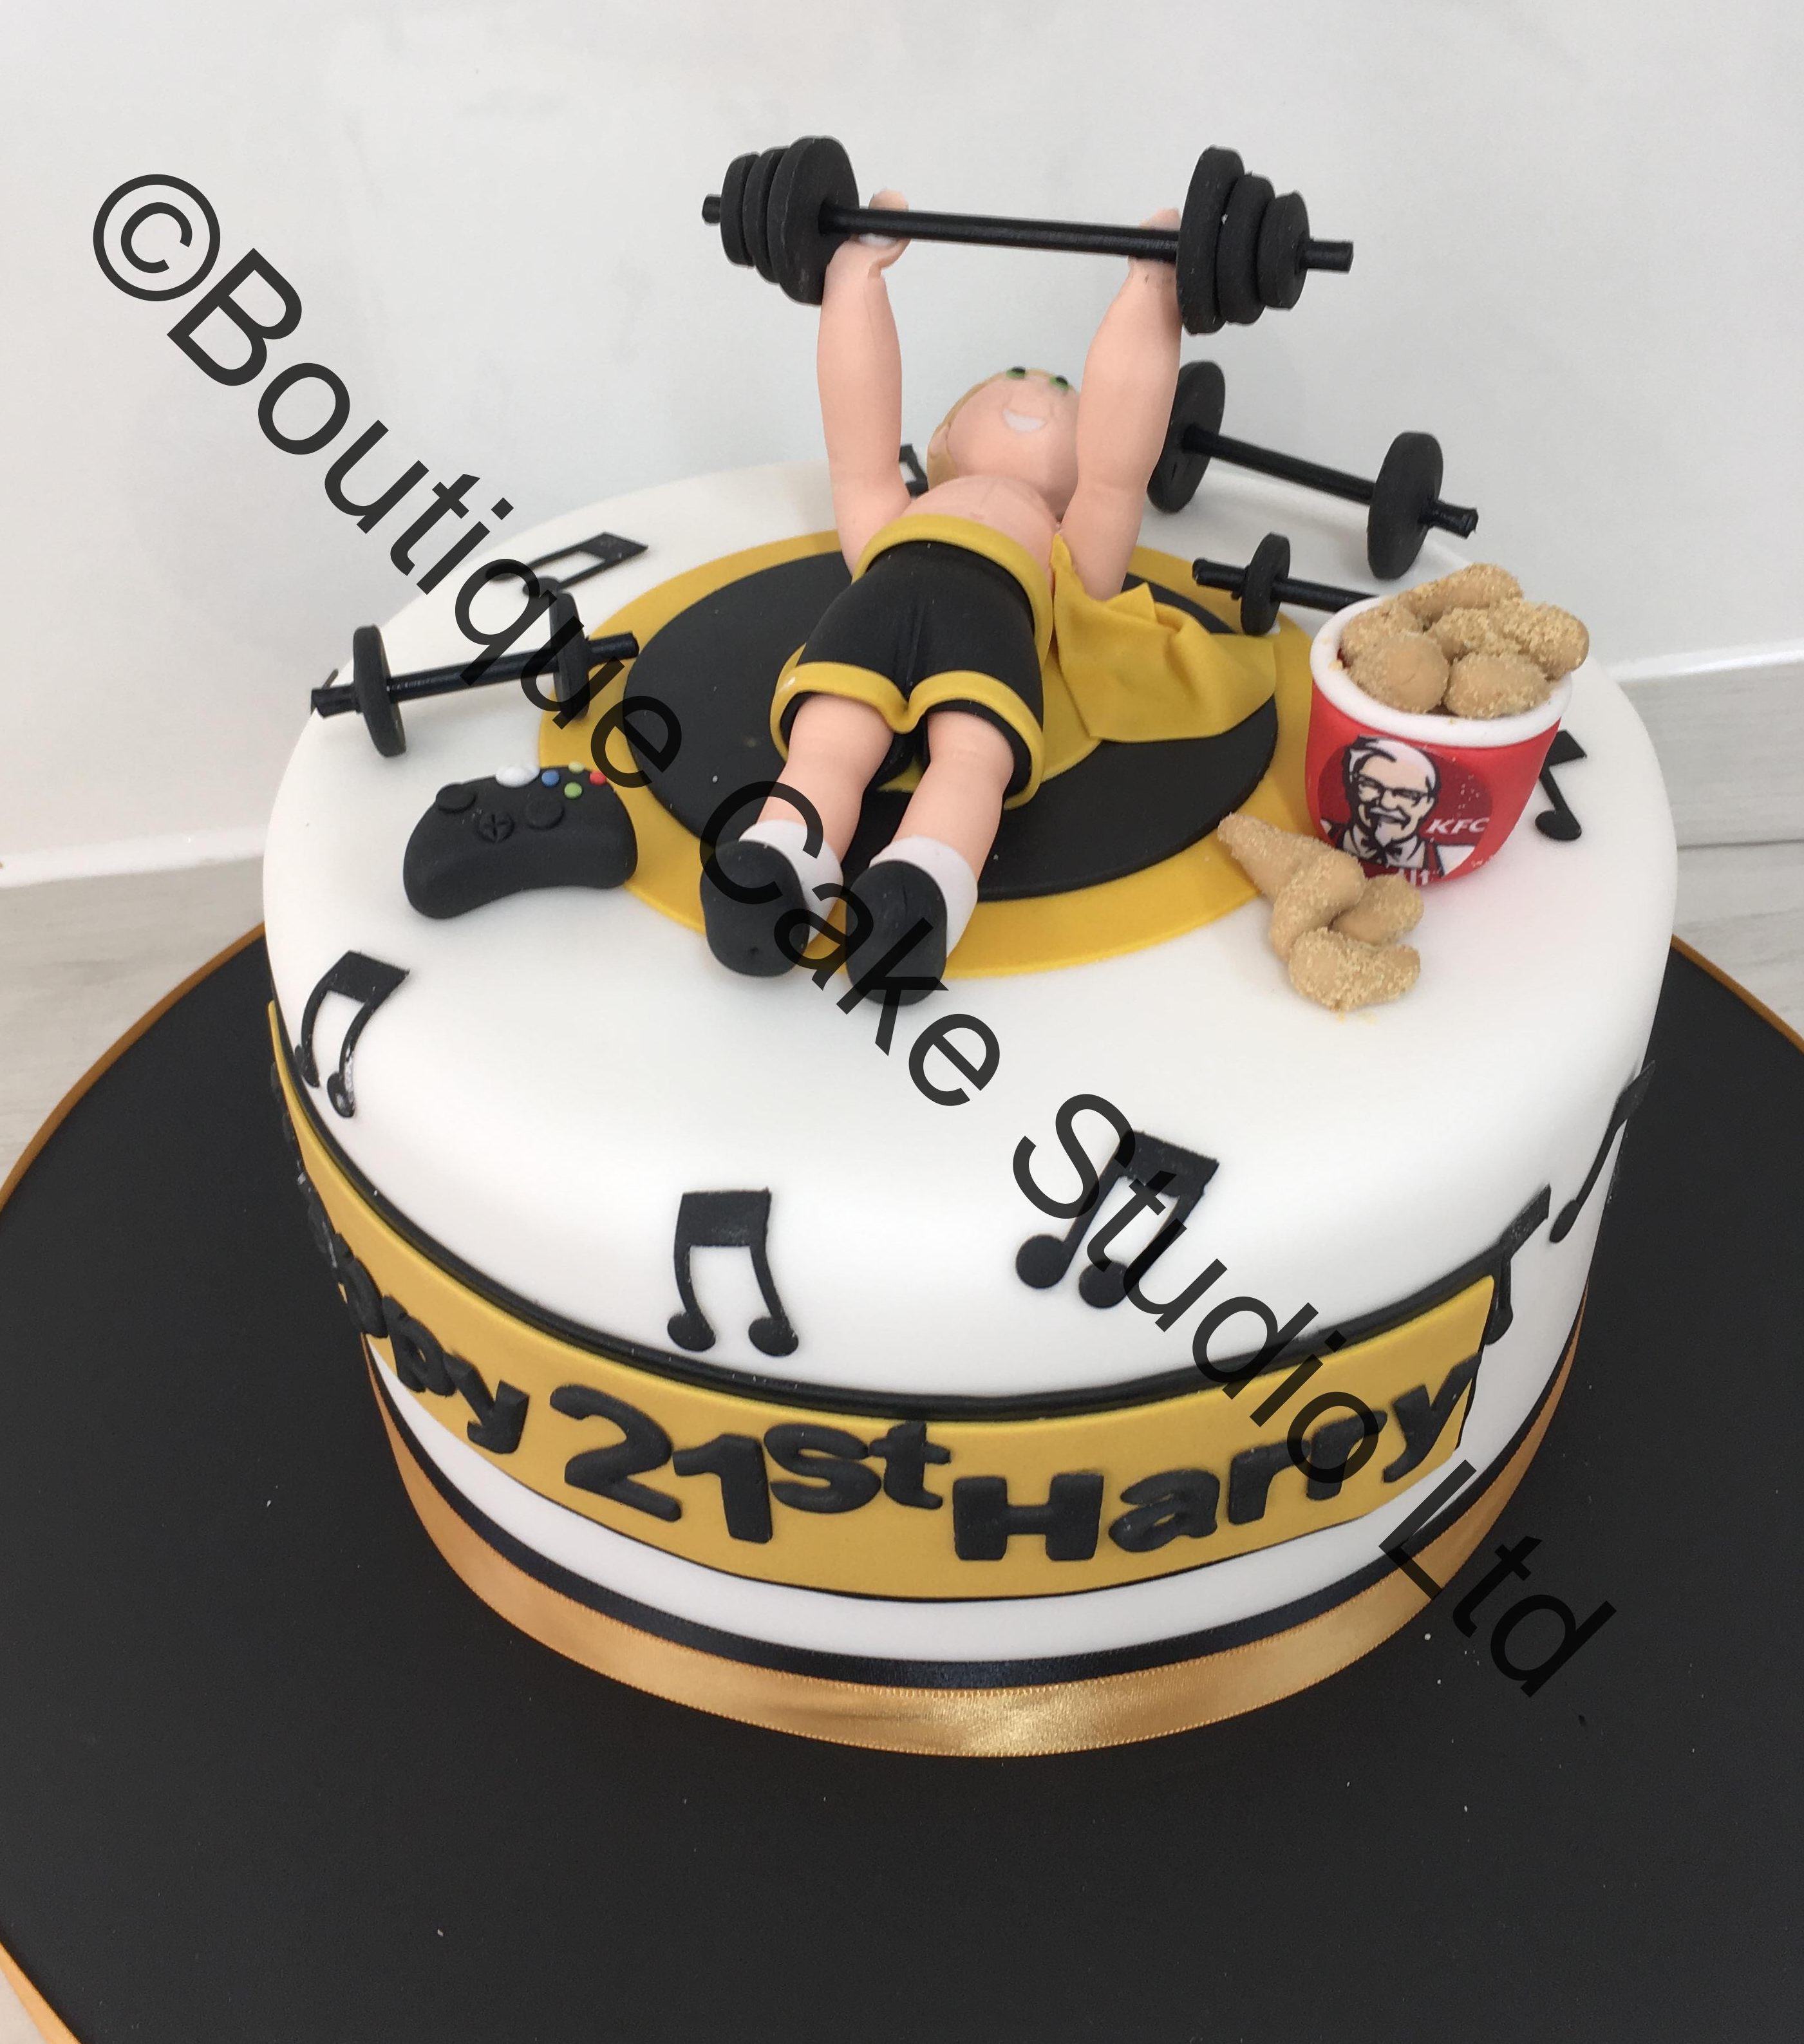 Weight Lifter Cake with KFC